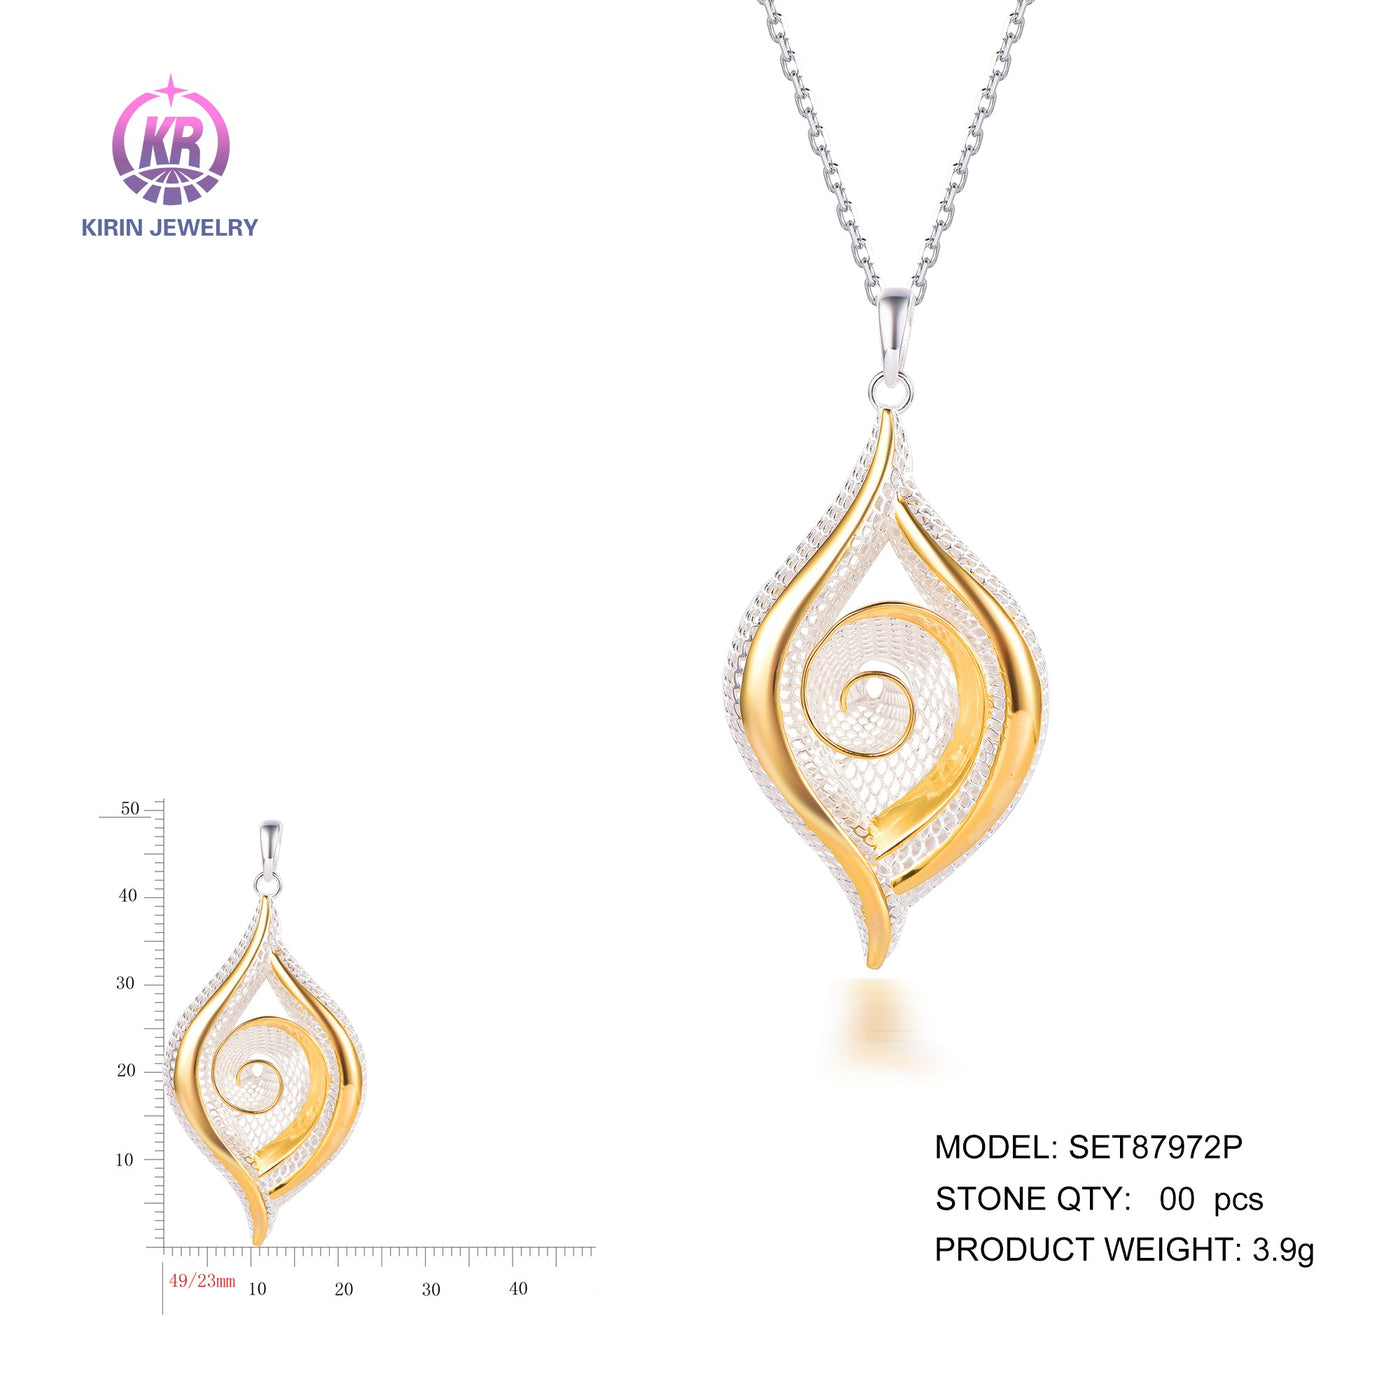 925 silver pendant with 2-tone plating rhodium and 14K gold SET87972P Kirin Jewelry